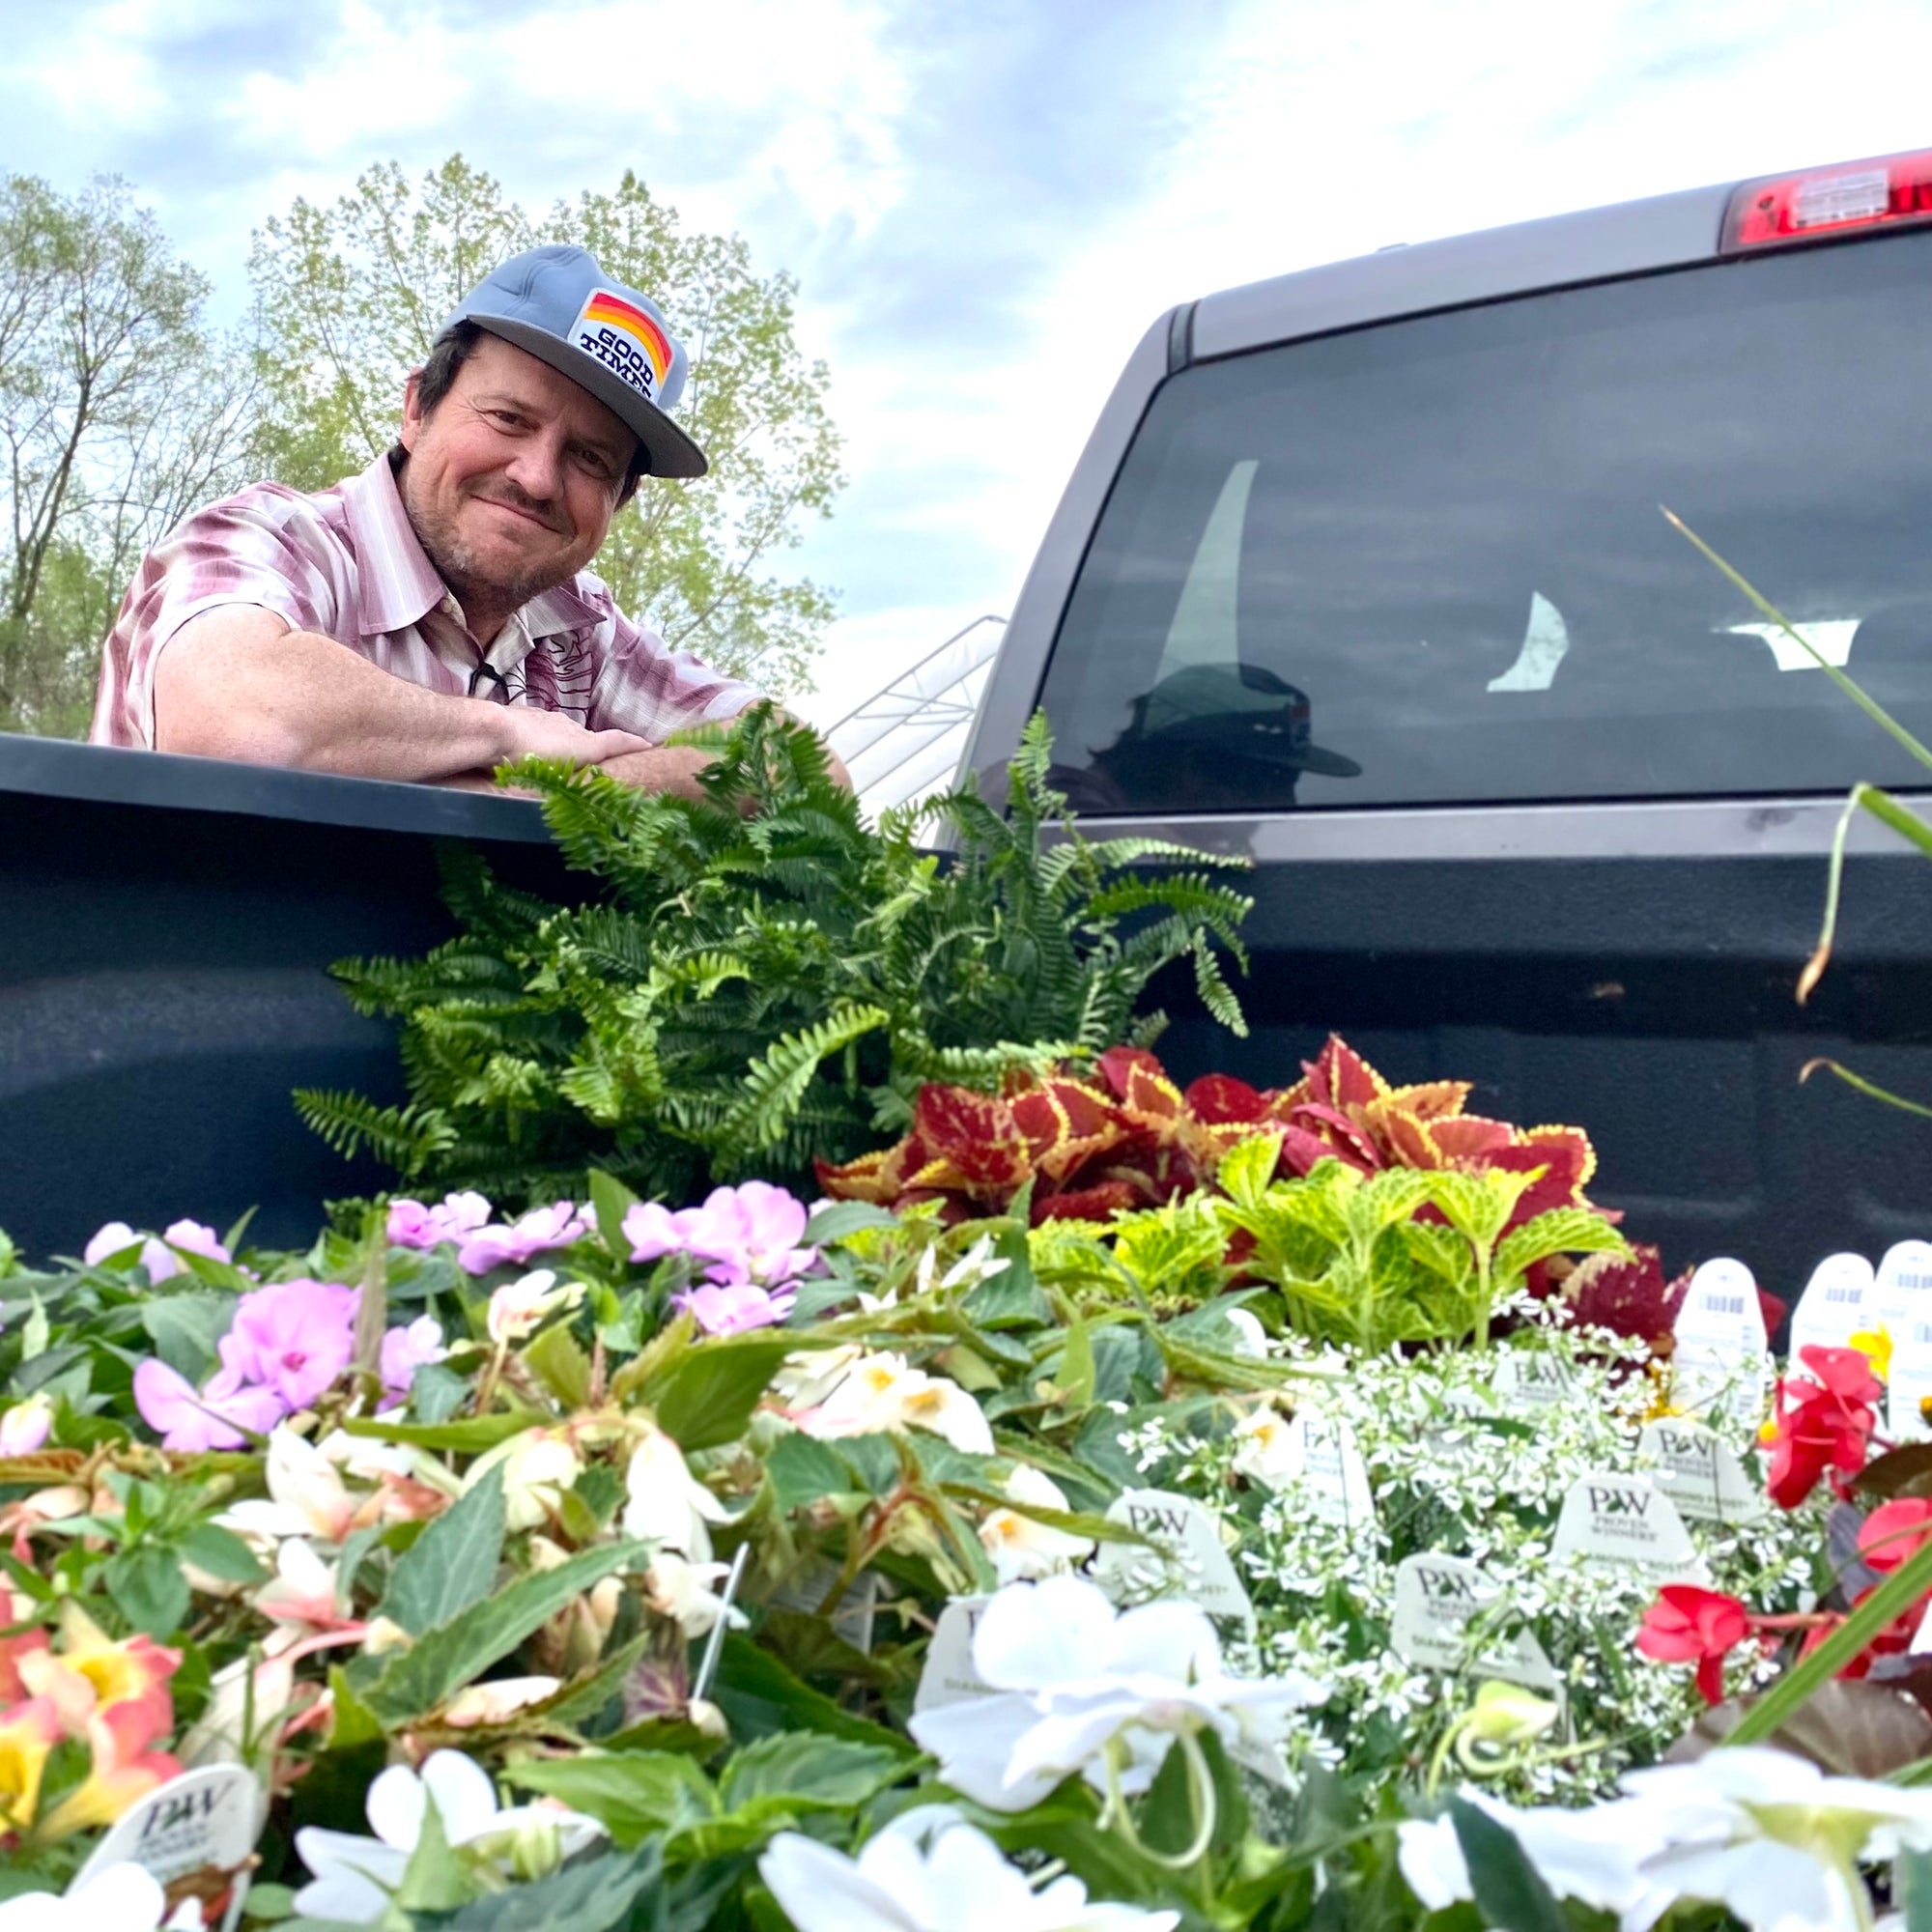 Kelley from Good Times Horticulture leaning over a truck bed full of flowers